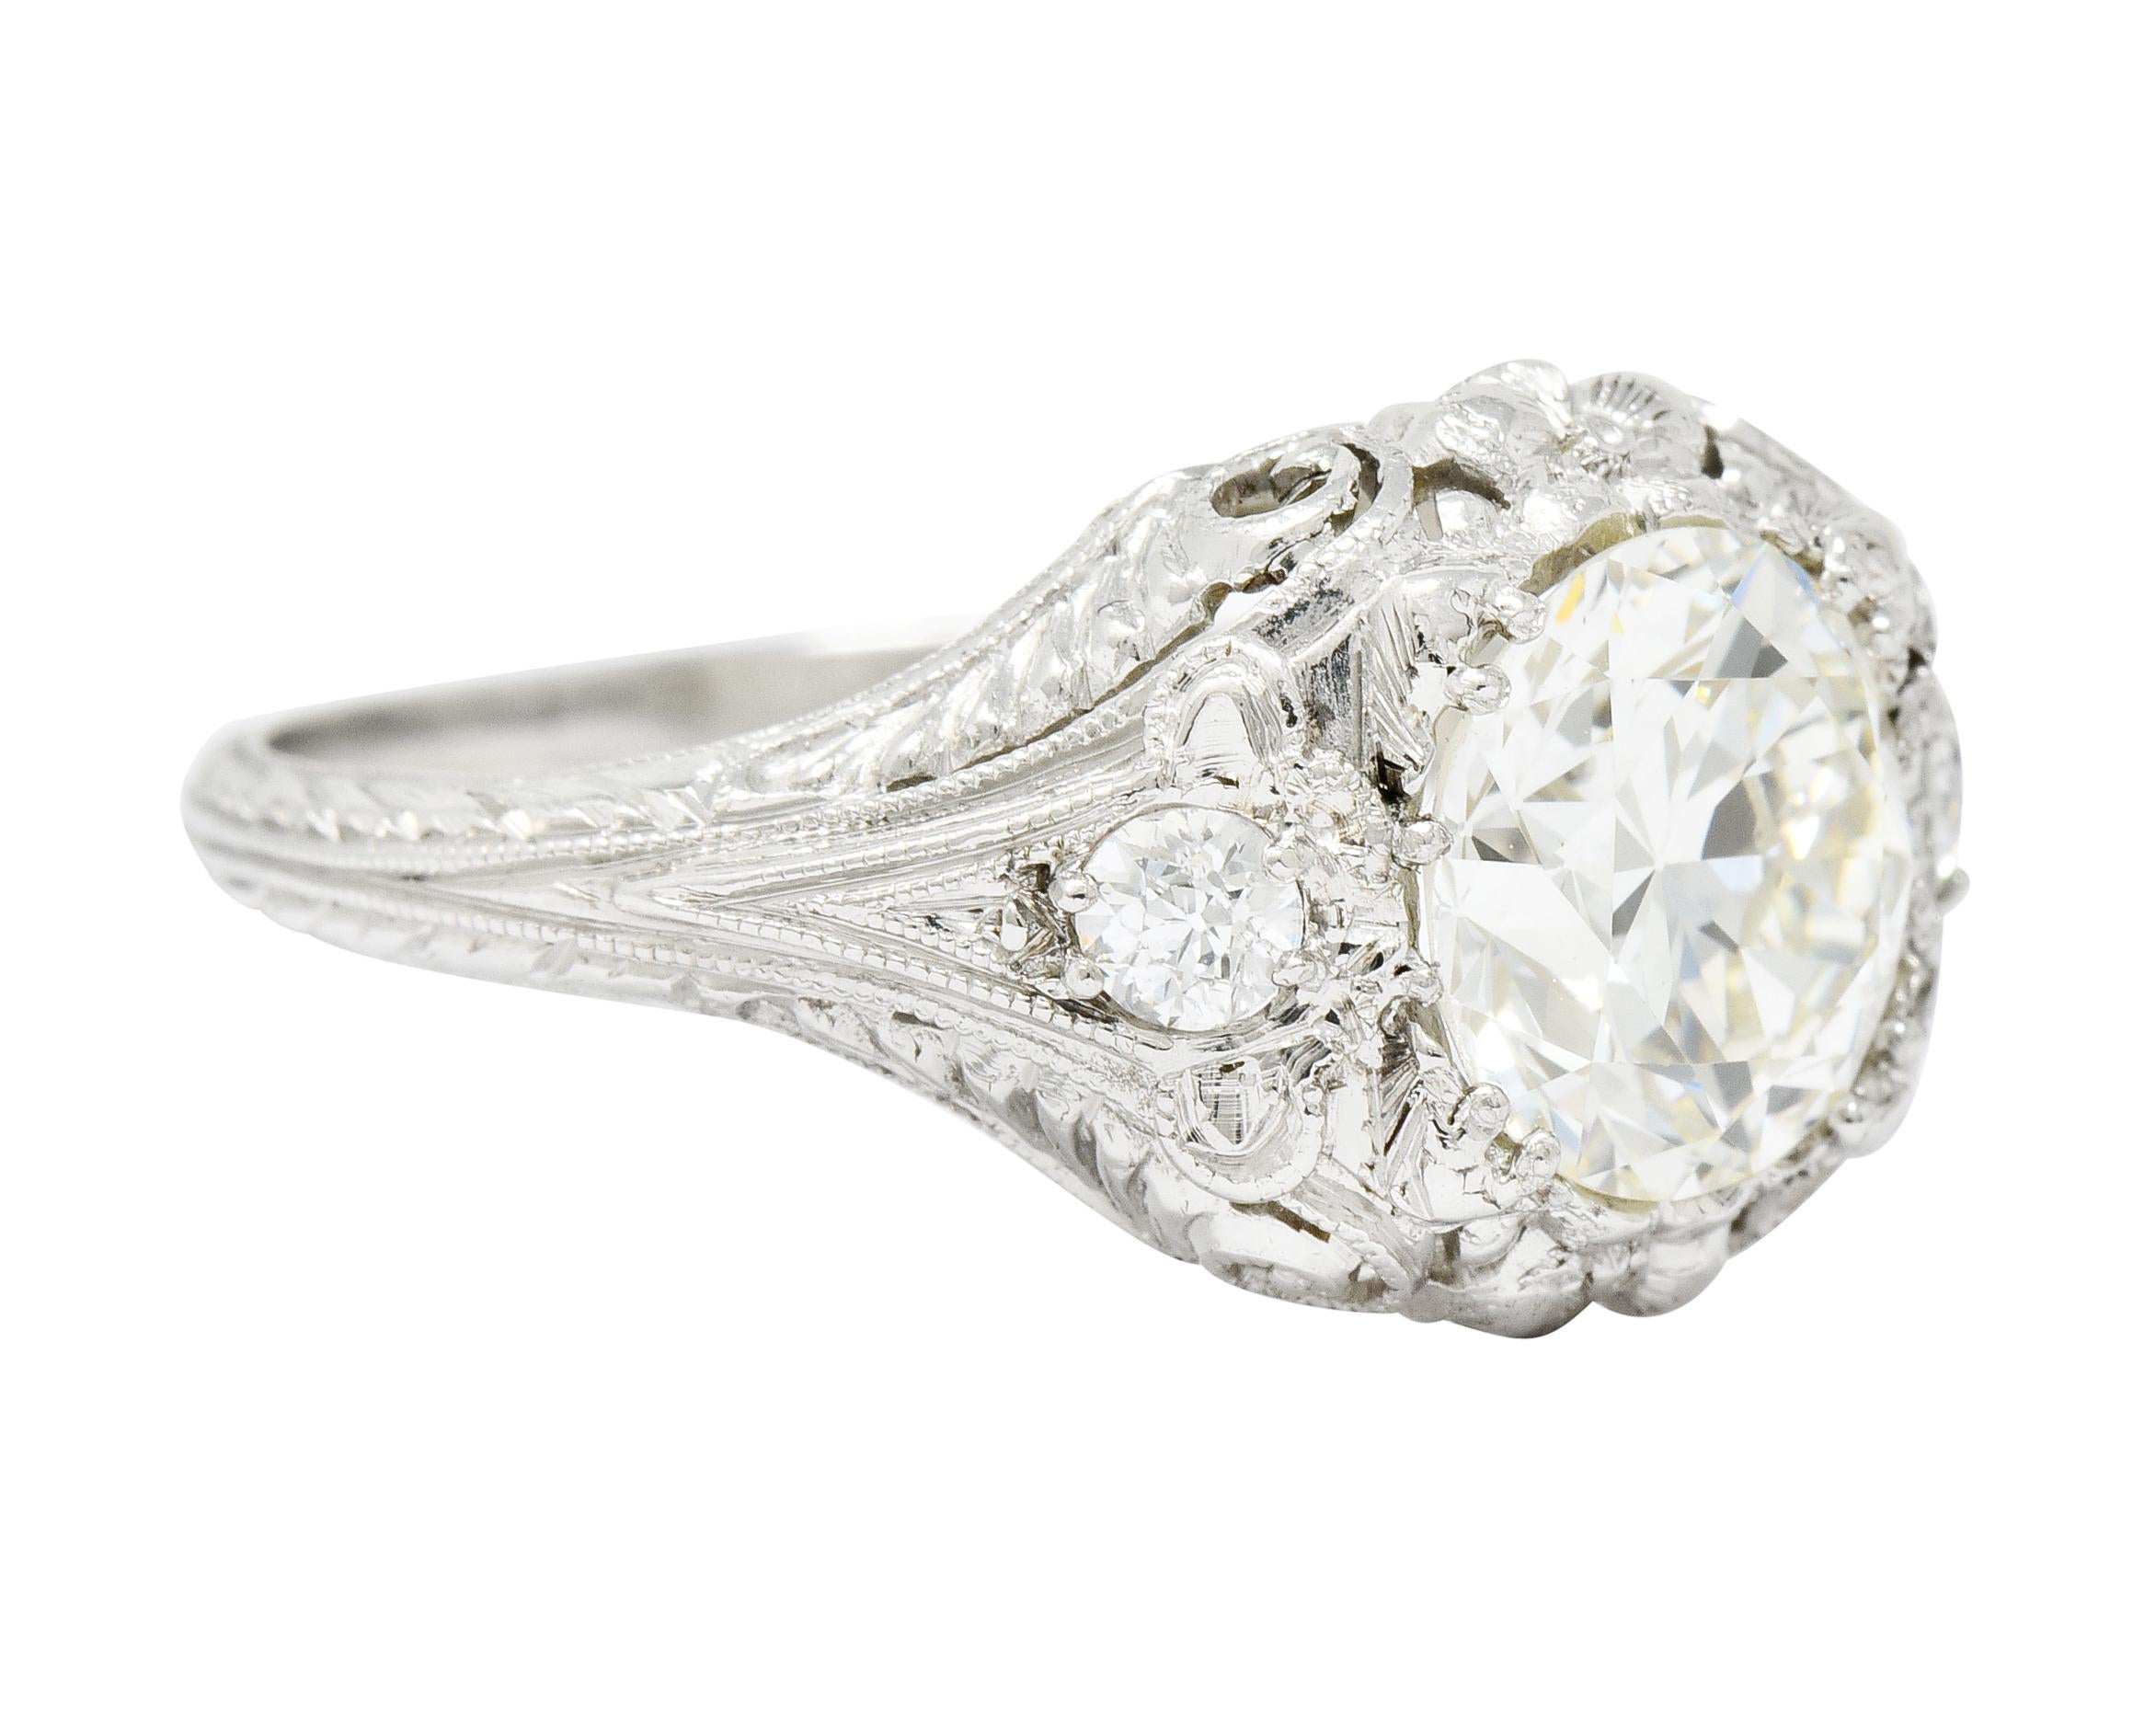 Centering an old European cut diamond weighing approximately 1.95 carats, L color with VS clarity

Set low in a decorative mounting featuring scrolled and scalloped shoulders with milgrain edges, orange blossom motif, and deeply engraved foliate